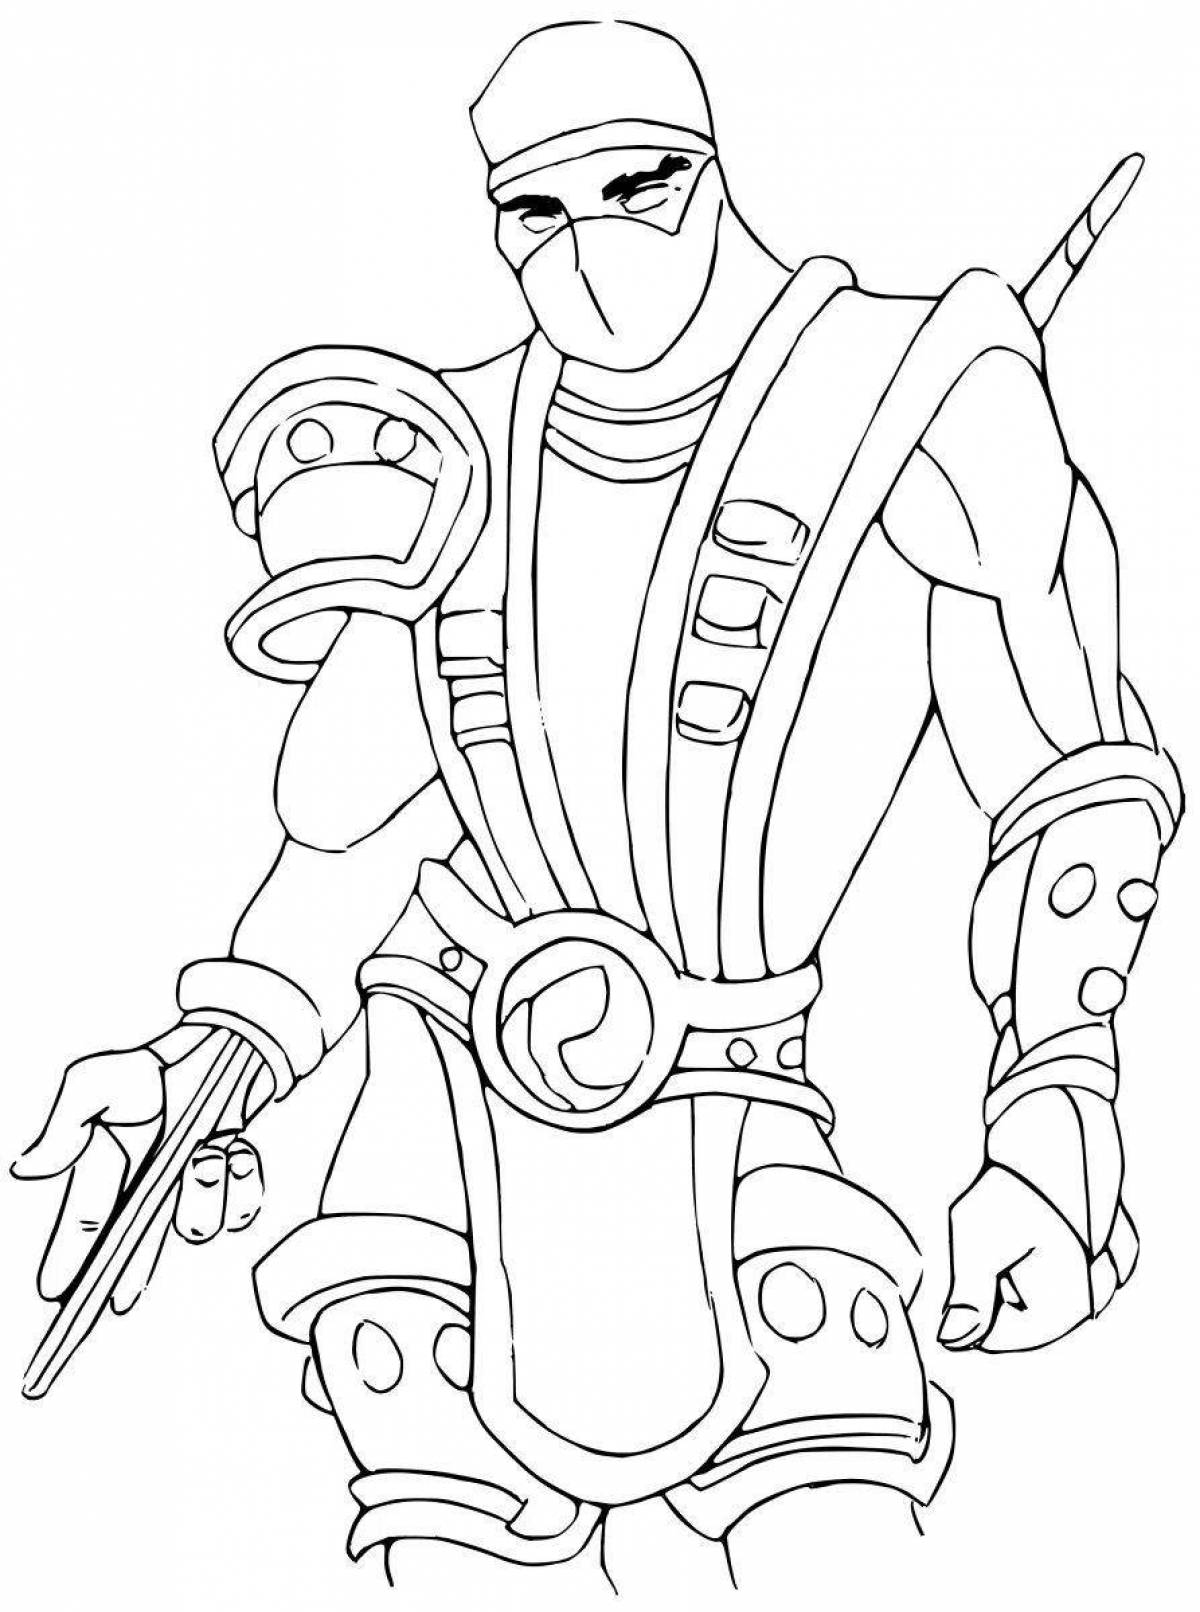 Animated motor battalion coloring page